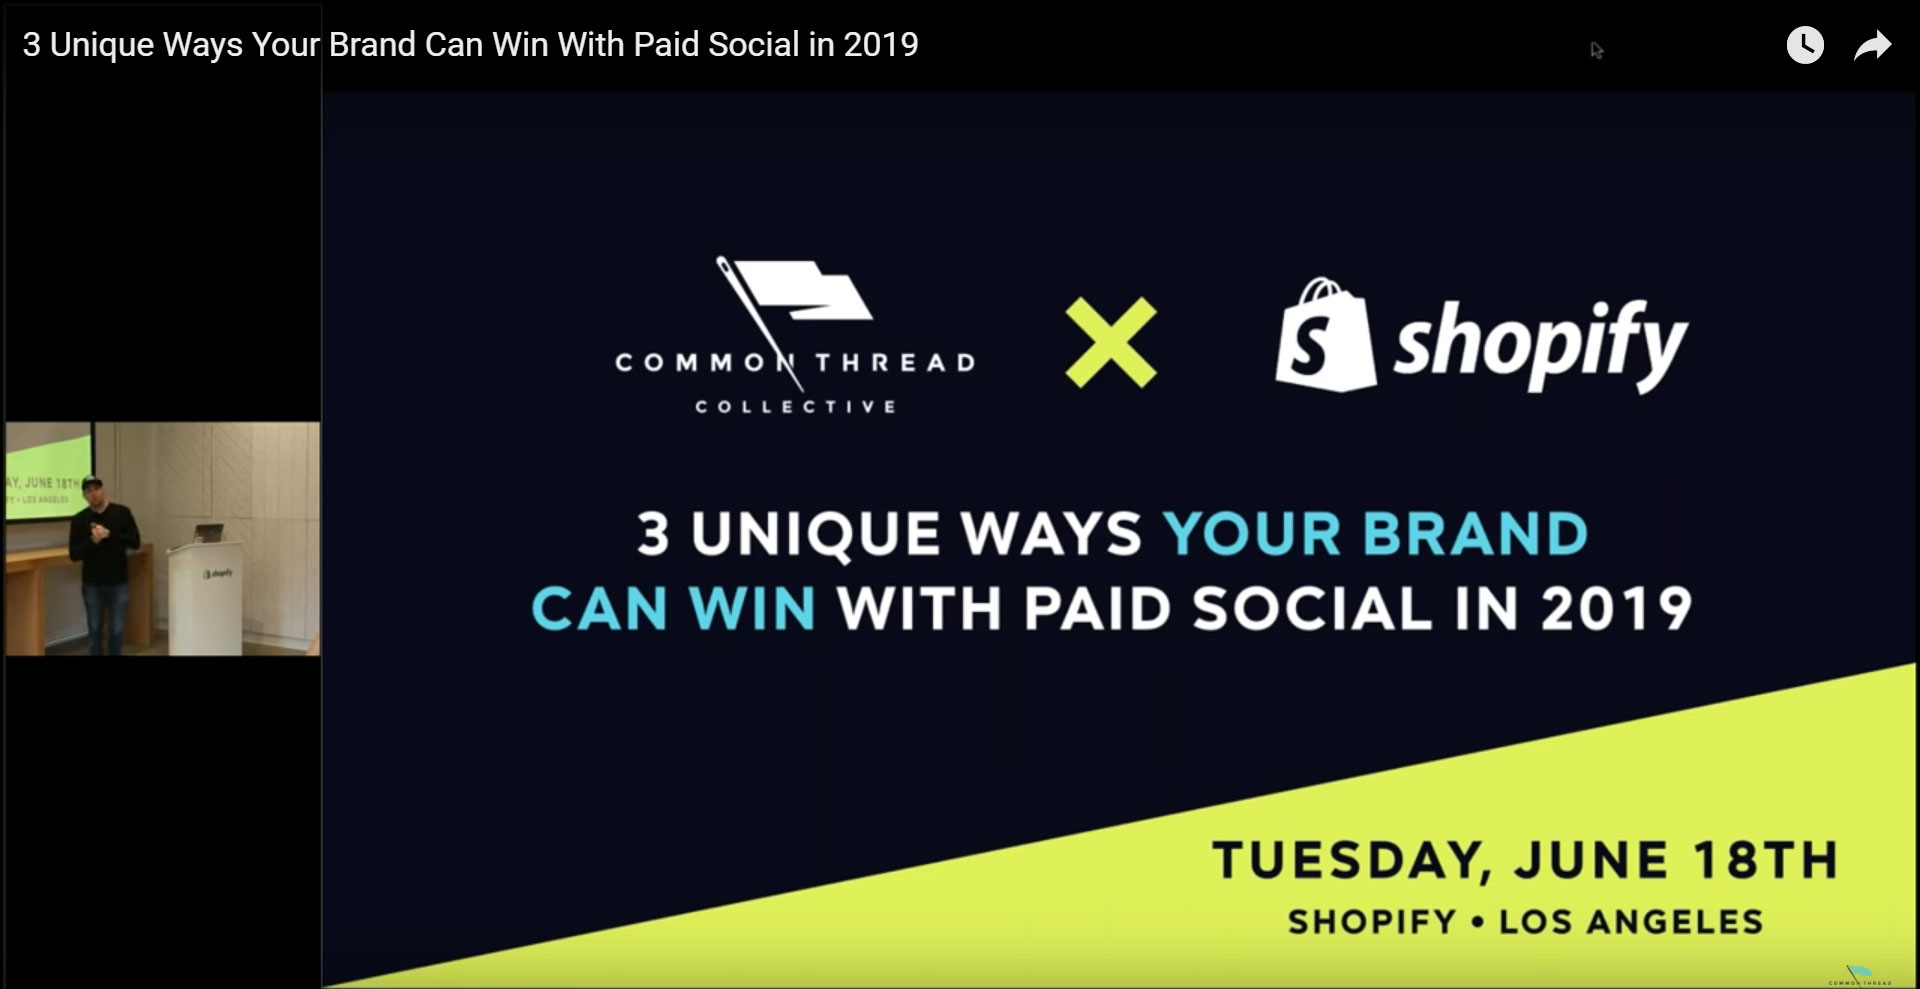 3 Unique Ways Your Brand Can Win With Paid Social in 2019